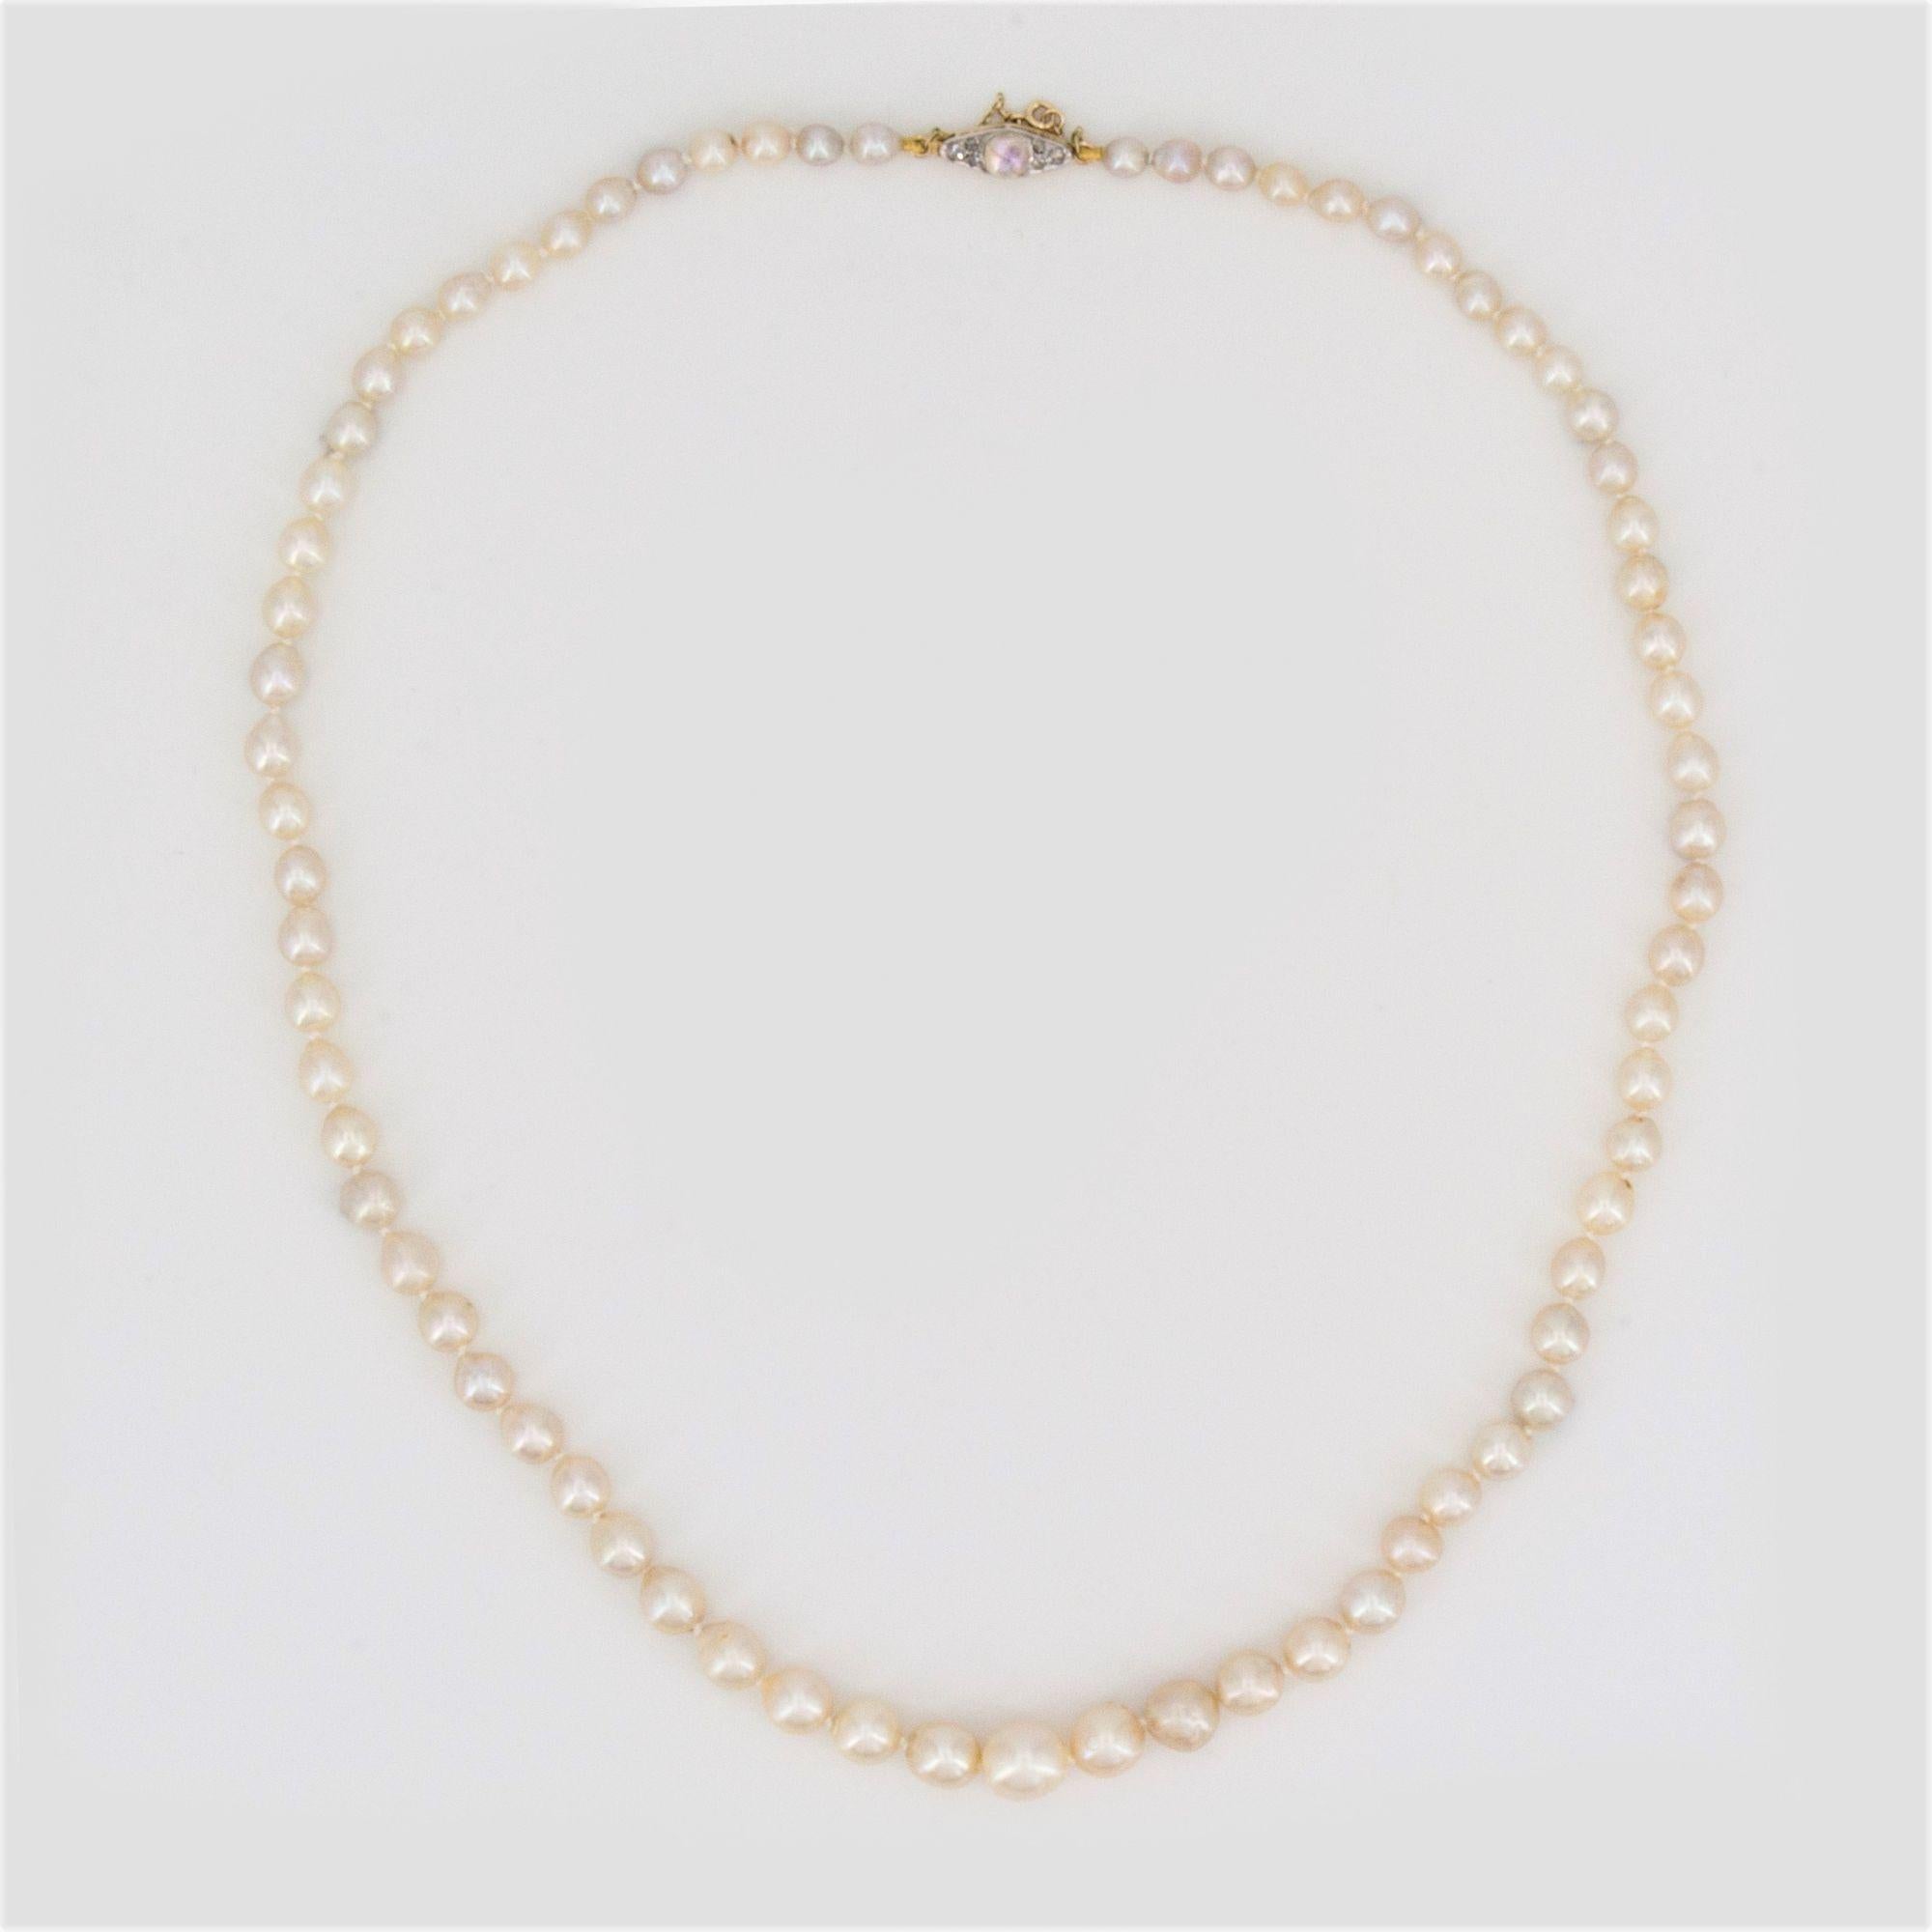 18th century pearl necklace